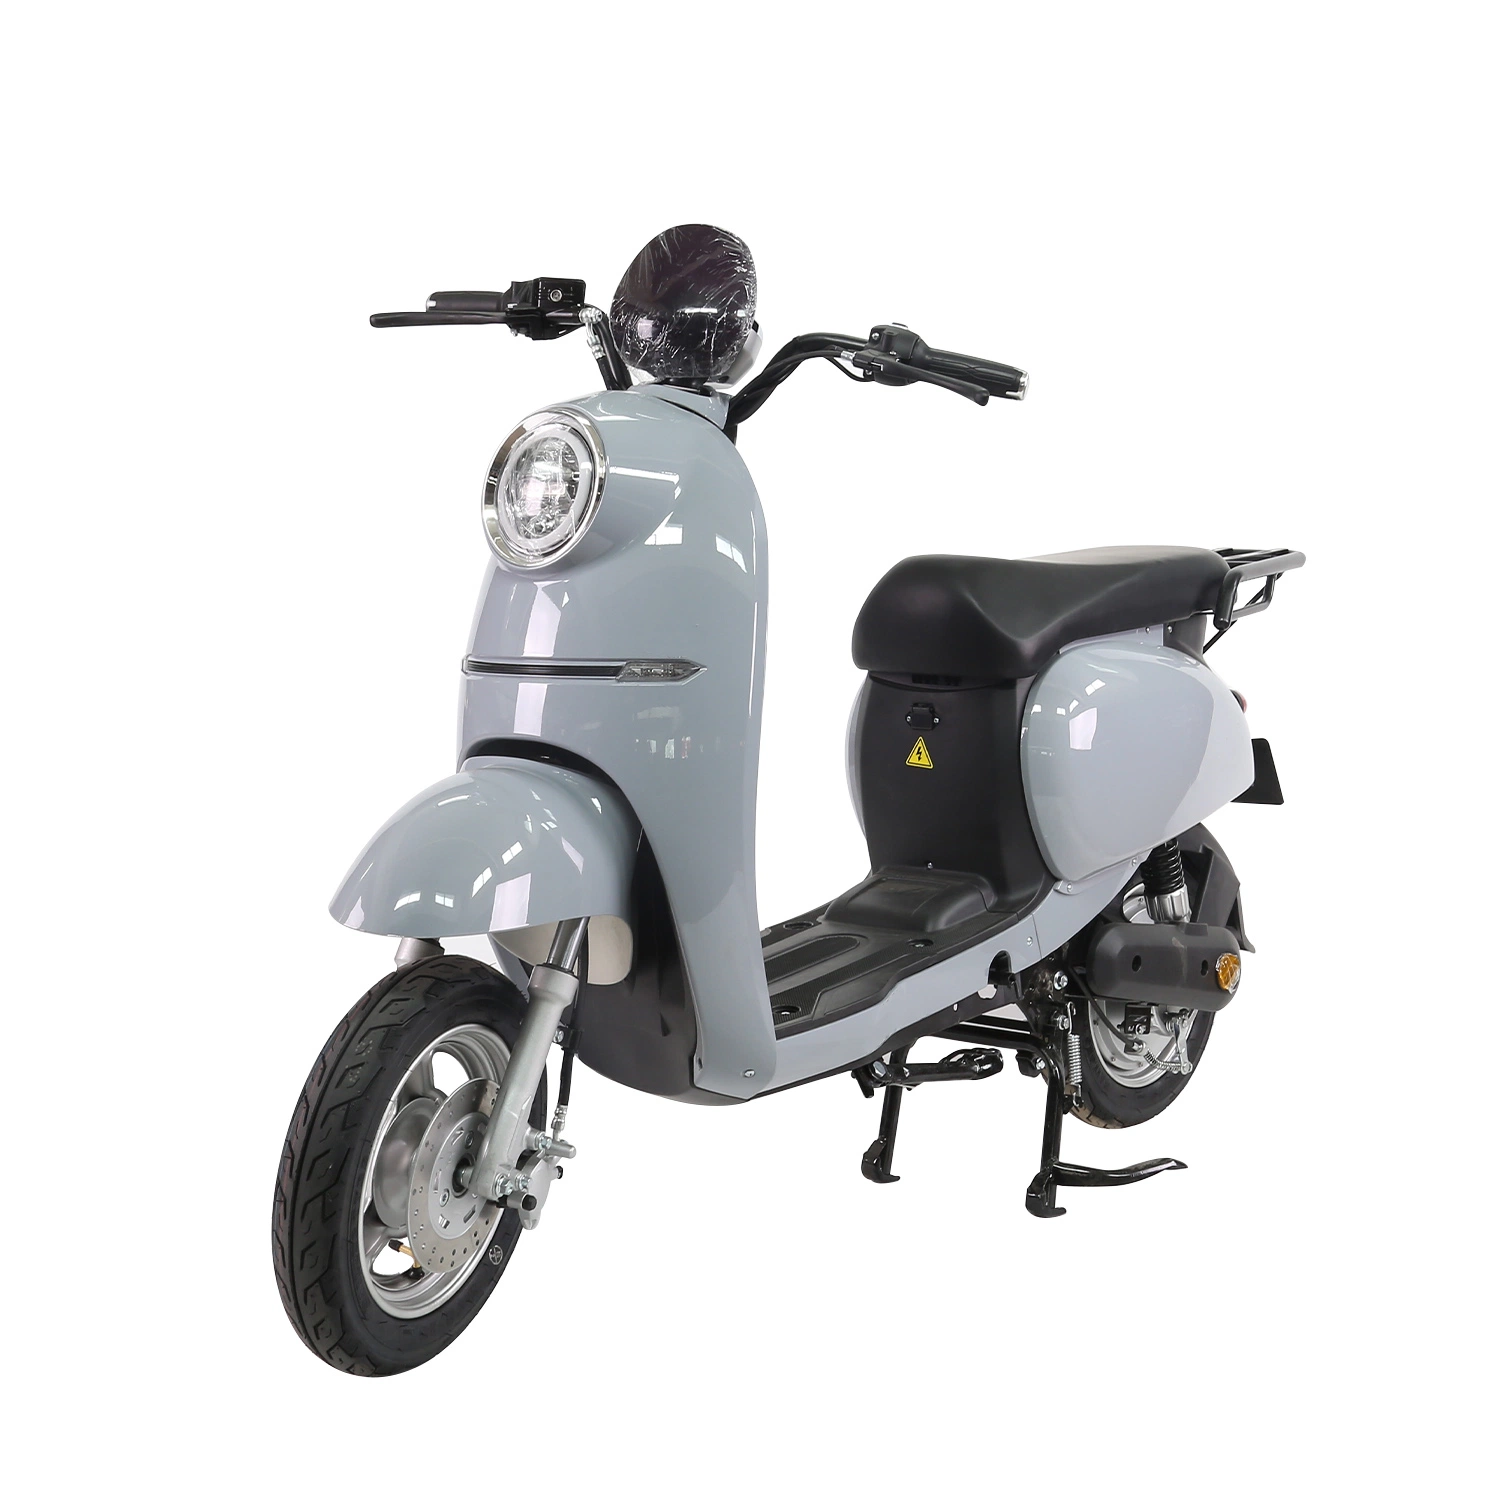 1500W Max Speed 50km/H and Max Range 90km Vespa Two Sets of 70V35ah Low-Carbon Electric Motorcycle Control System LED Light Electric Car Low-Cardon Gradients